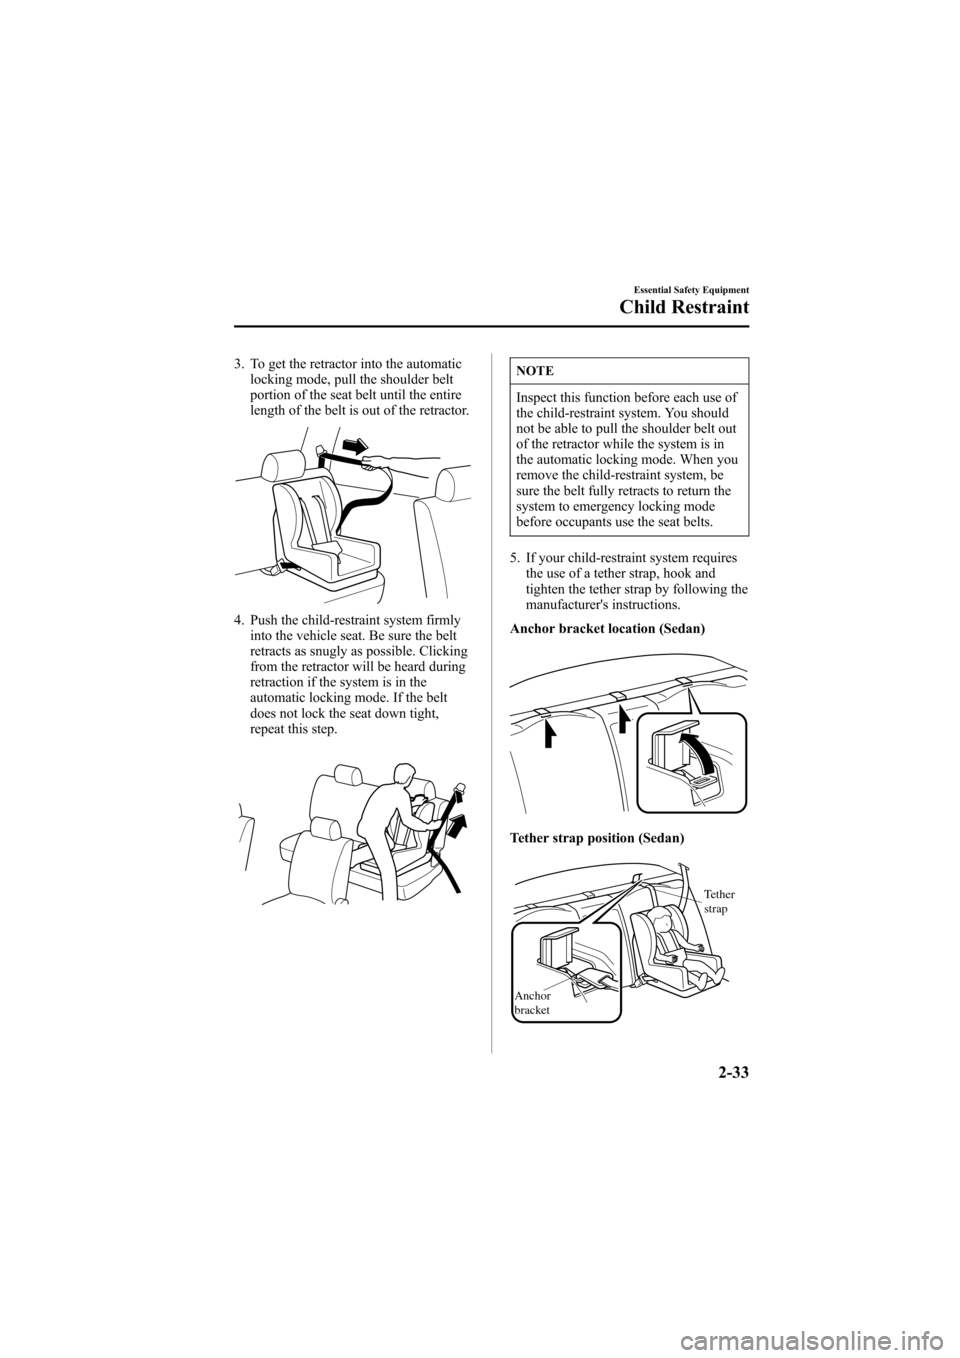 MAZDA MODEL 6 2005  Owners Manual (in English) Black plate (47,1)
3. To get the retractor into the automatic
locking mode, pull the shoulder belt
portion of the seat belt until the entire
length of the belt is out of the retractor.
4. Push the chi